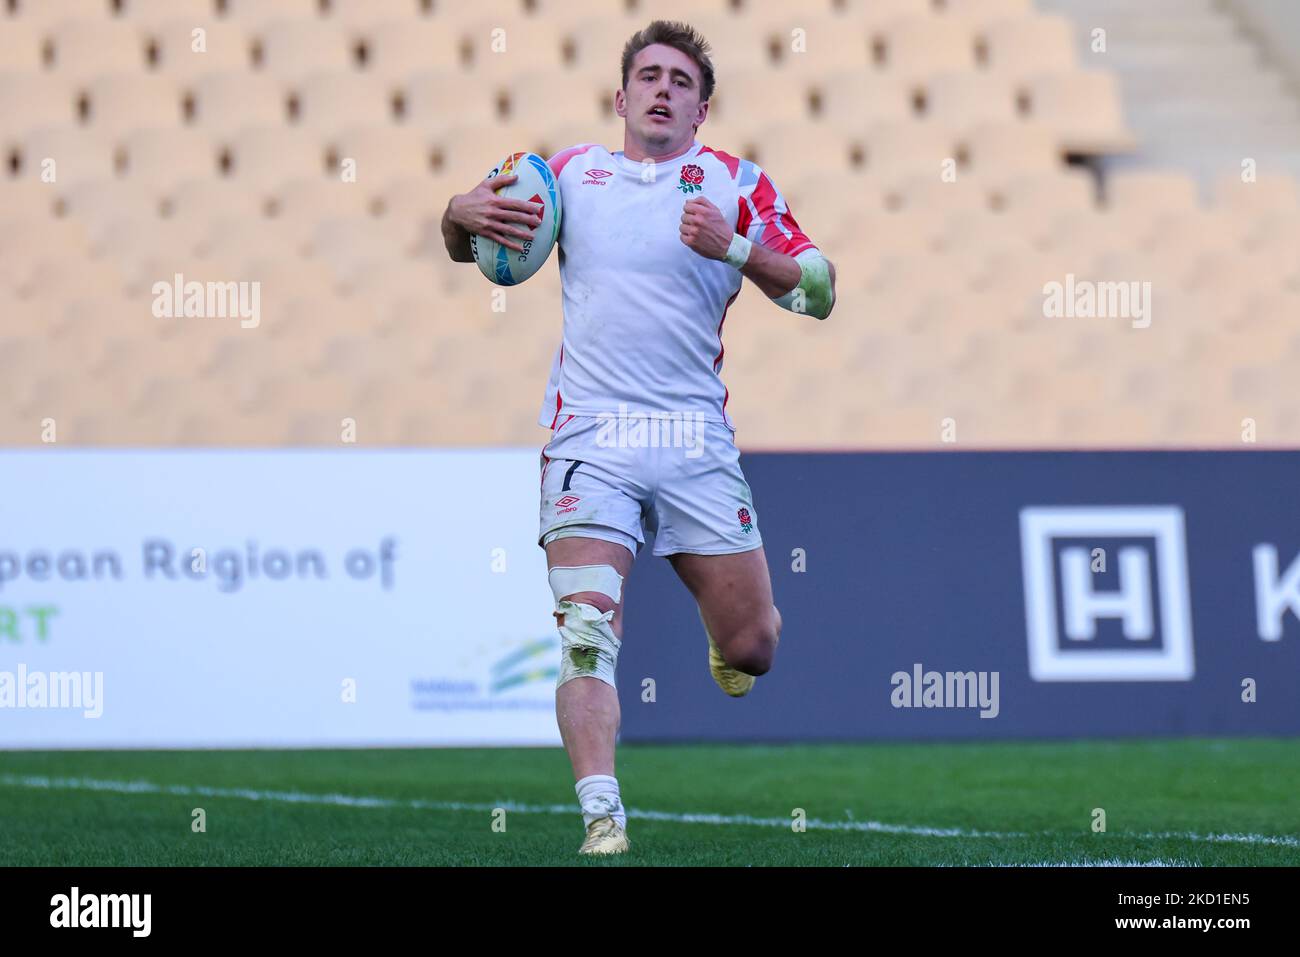 Calum Randle of England runs with the ball during the Men's HSBC World Rugby Sevens Series 2022 match between England and Wales at the La Cartuja stadium in Seville, on January 29, 2022. (Photo by DAX Images/NurPhoto) Stock Photo